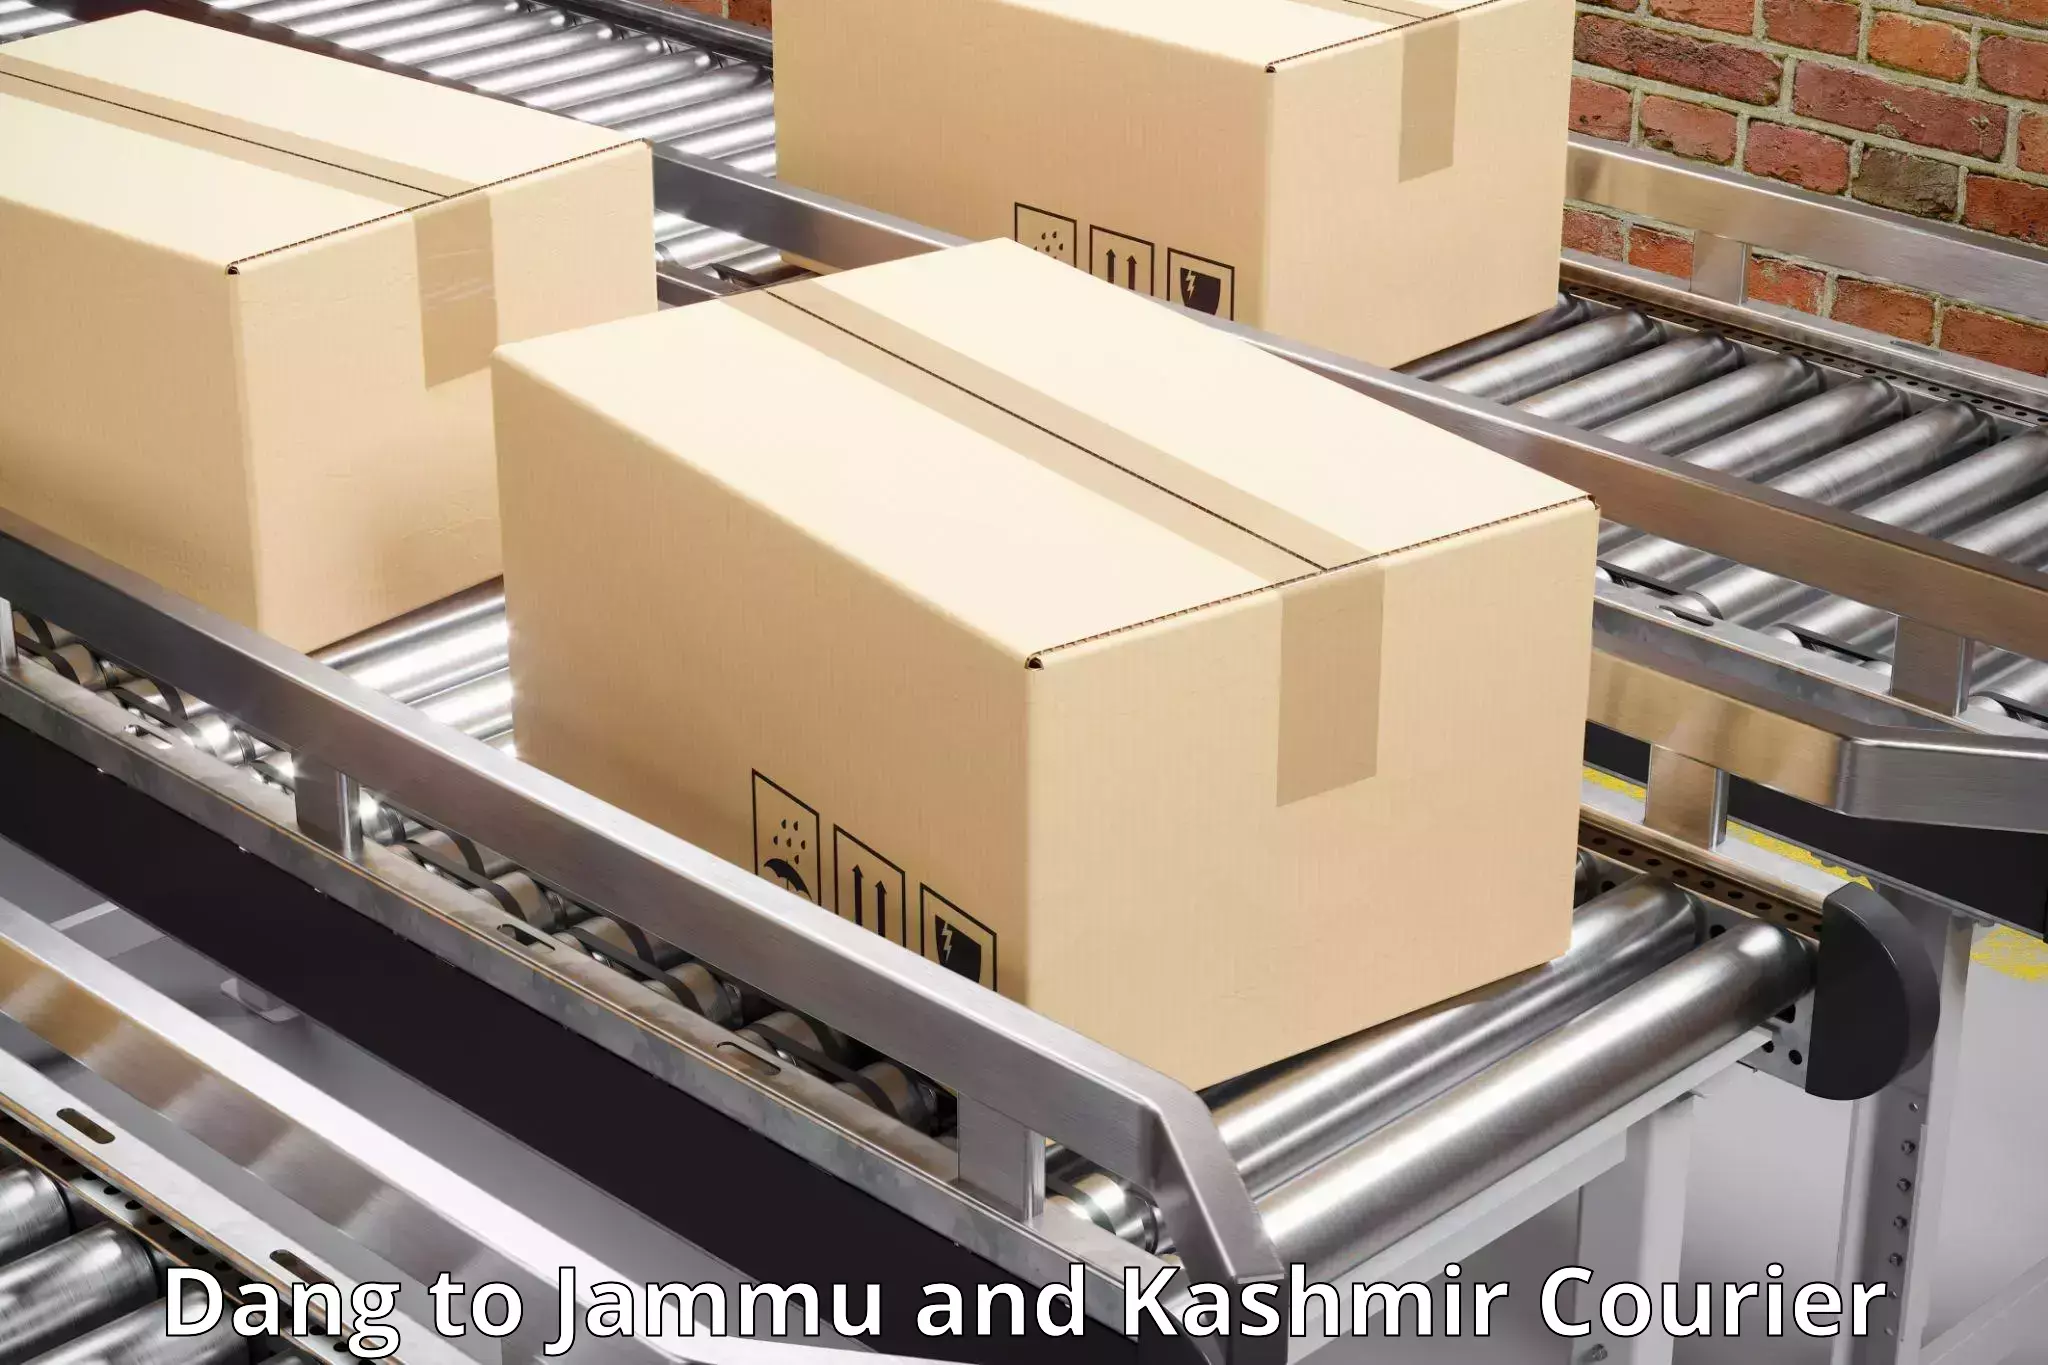 Courier service comparison Dang to University of Jammu